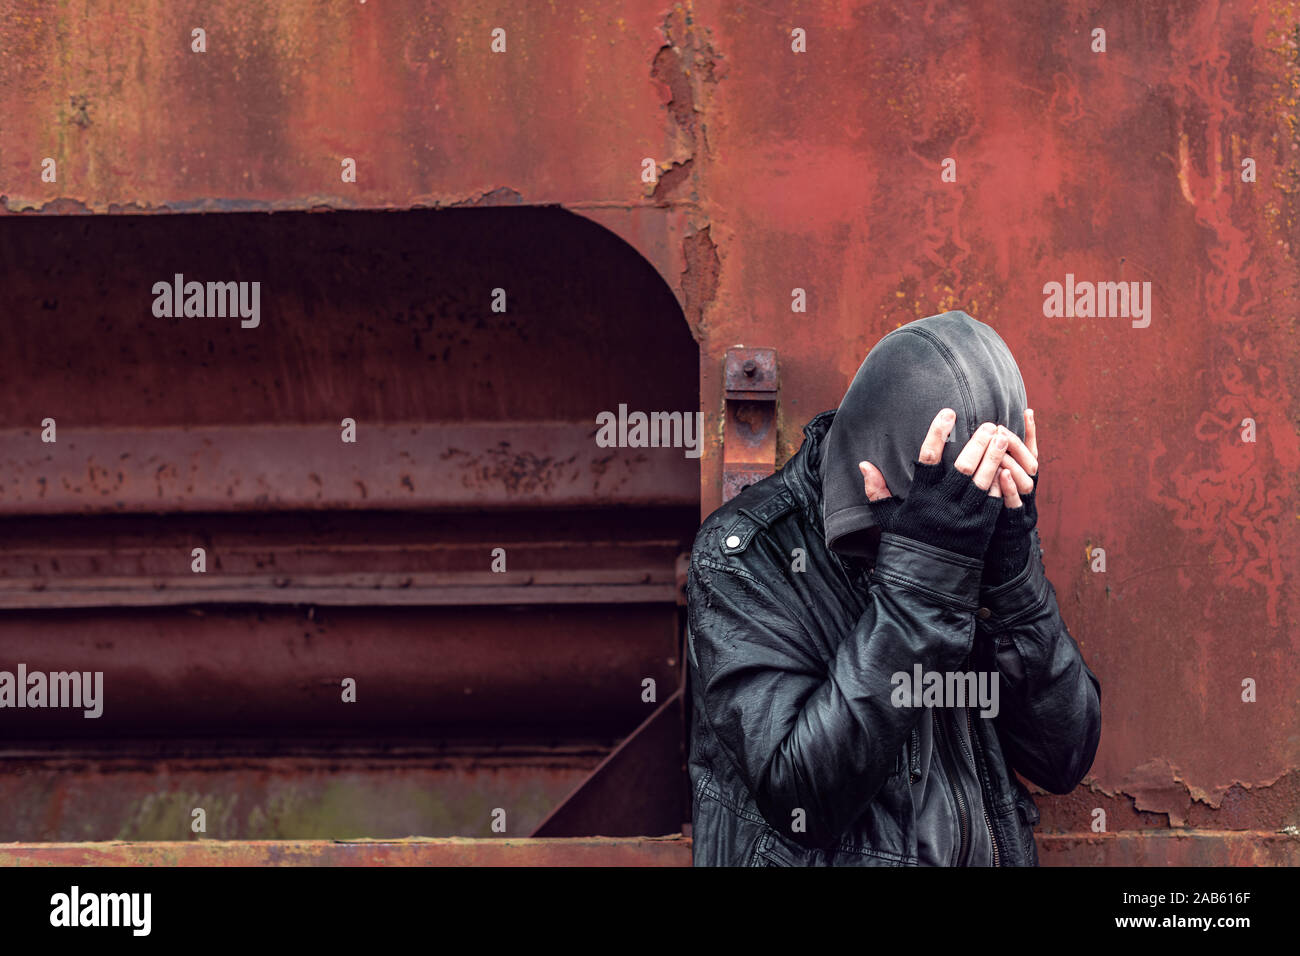 Homeless drug addict having abstinence crisis, conceptual portrait with selective focus Stock Photo